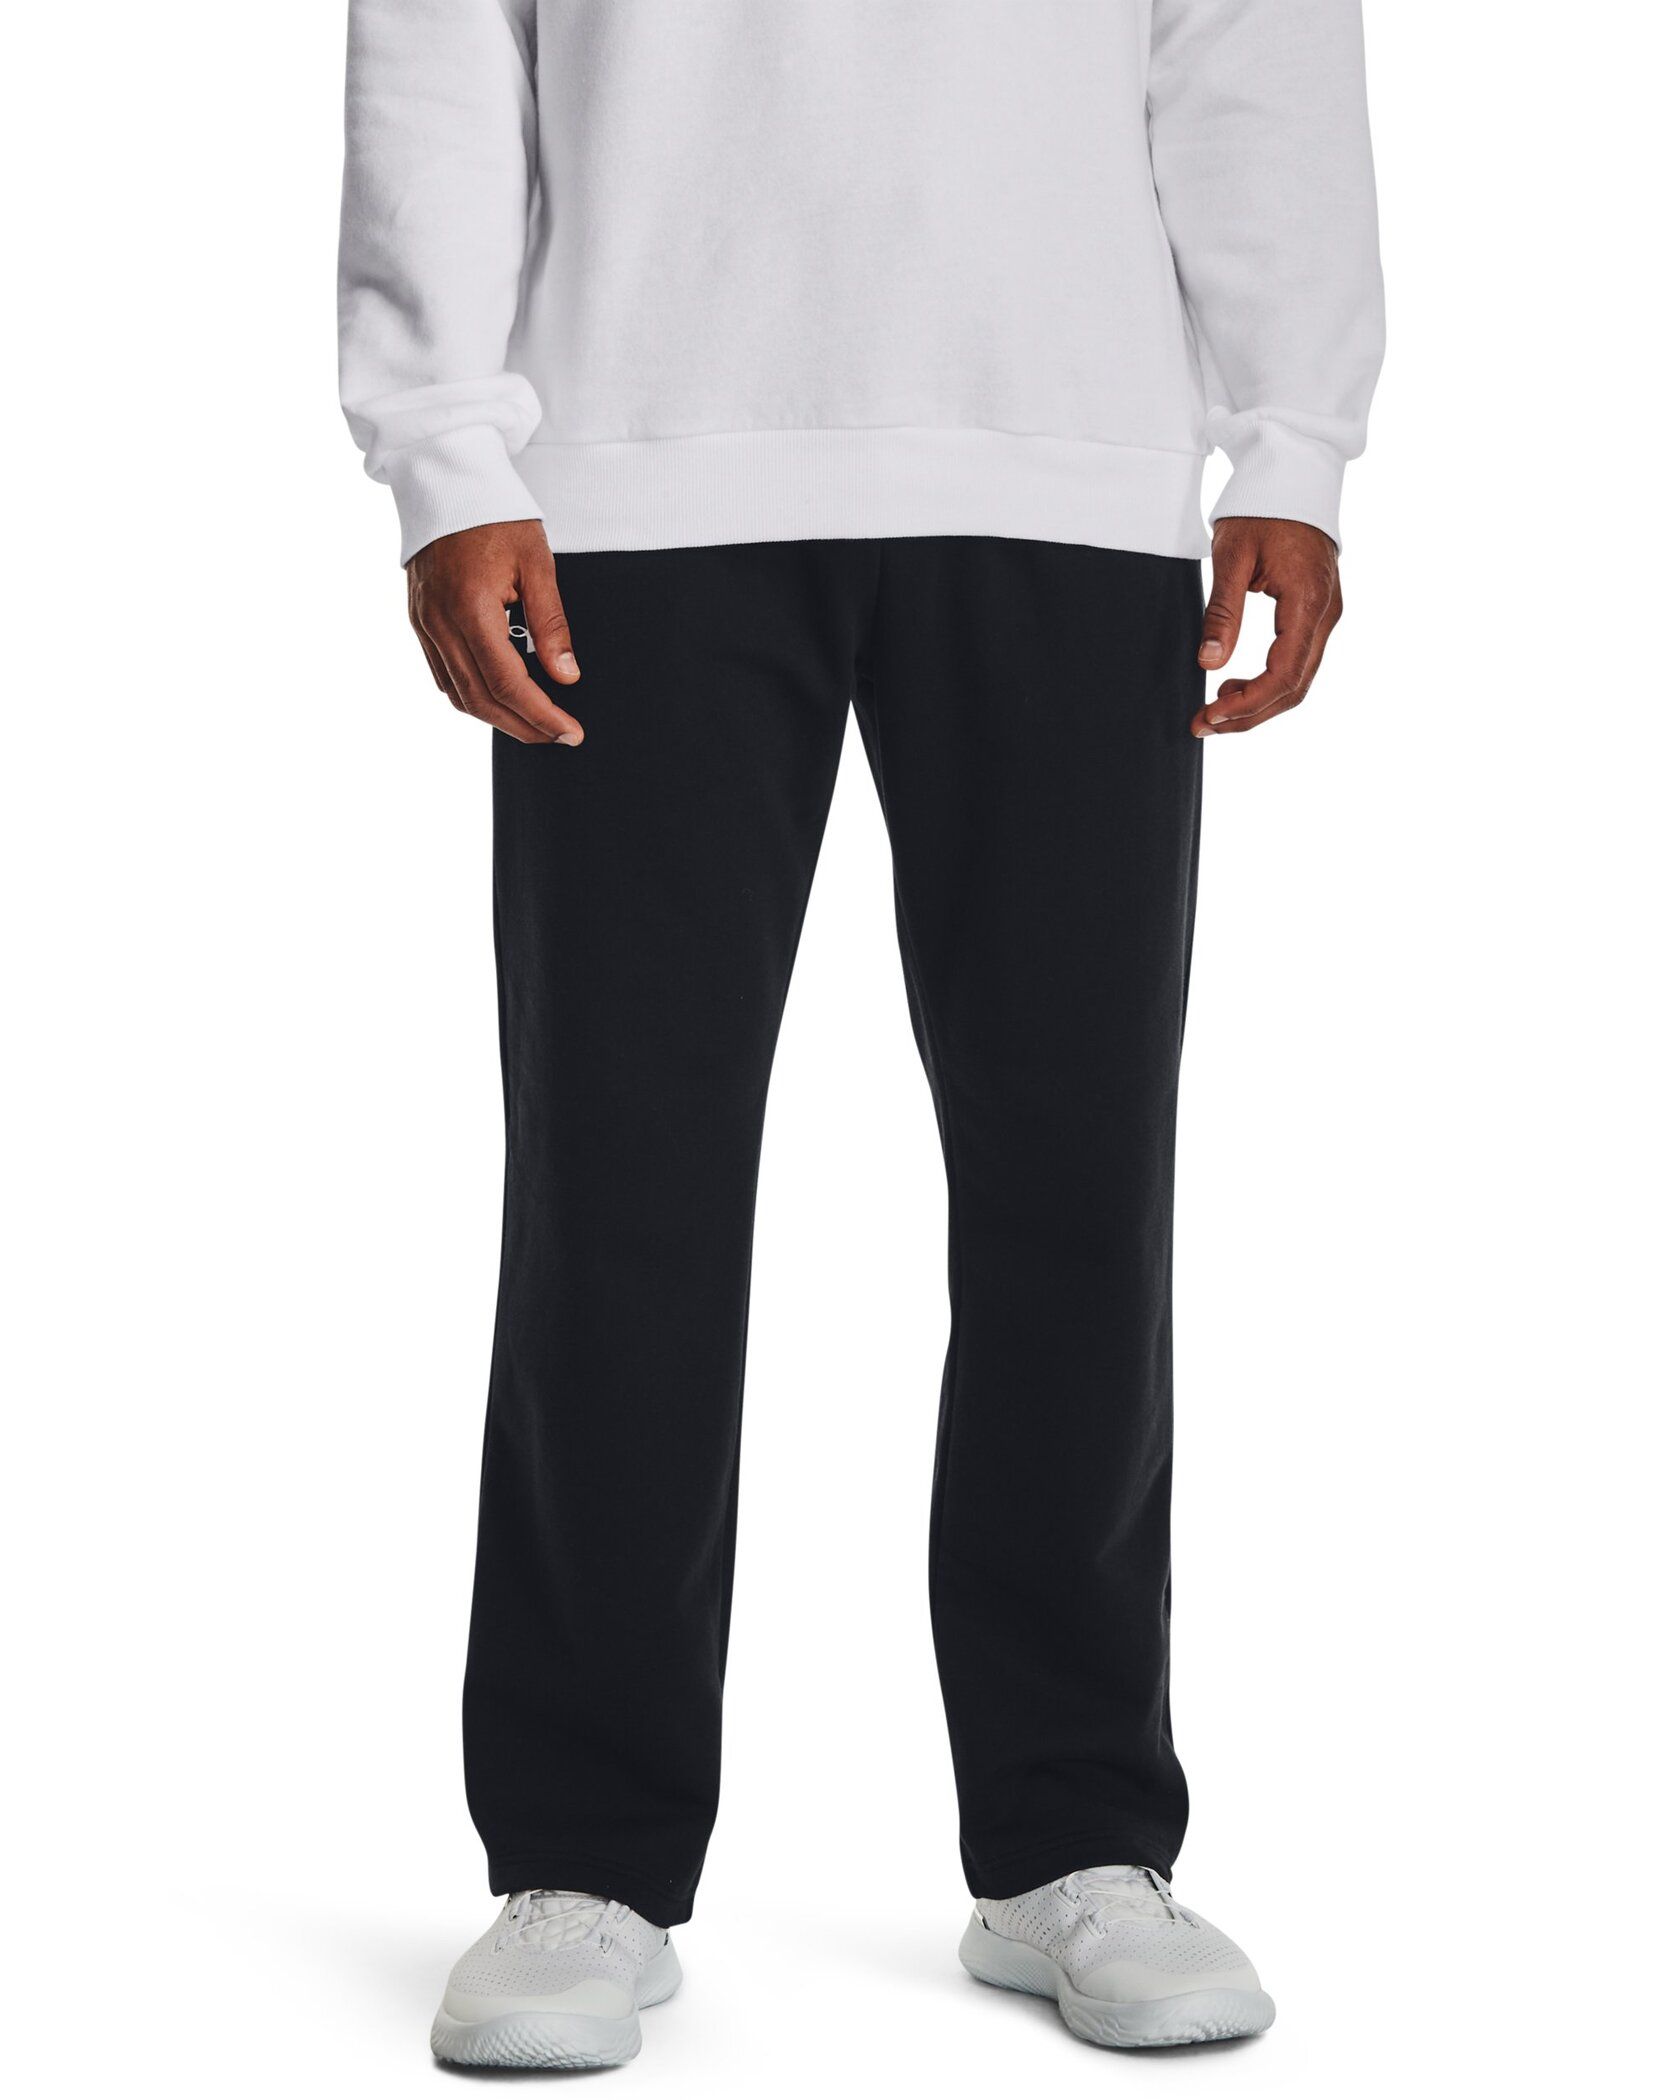 Order Online UA Project Rock Rival Fleece Joggers From Under Armour India